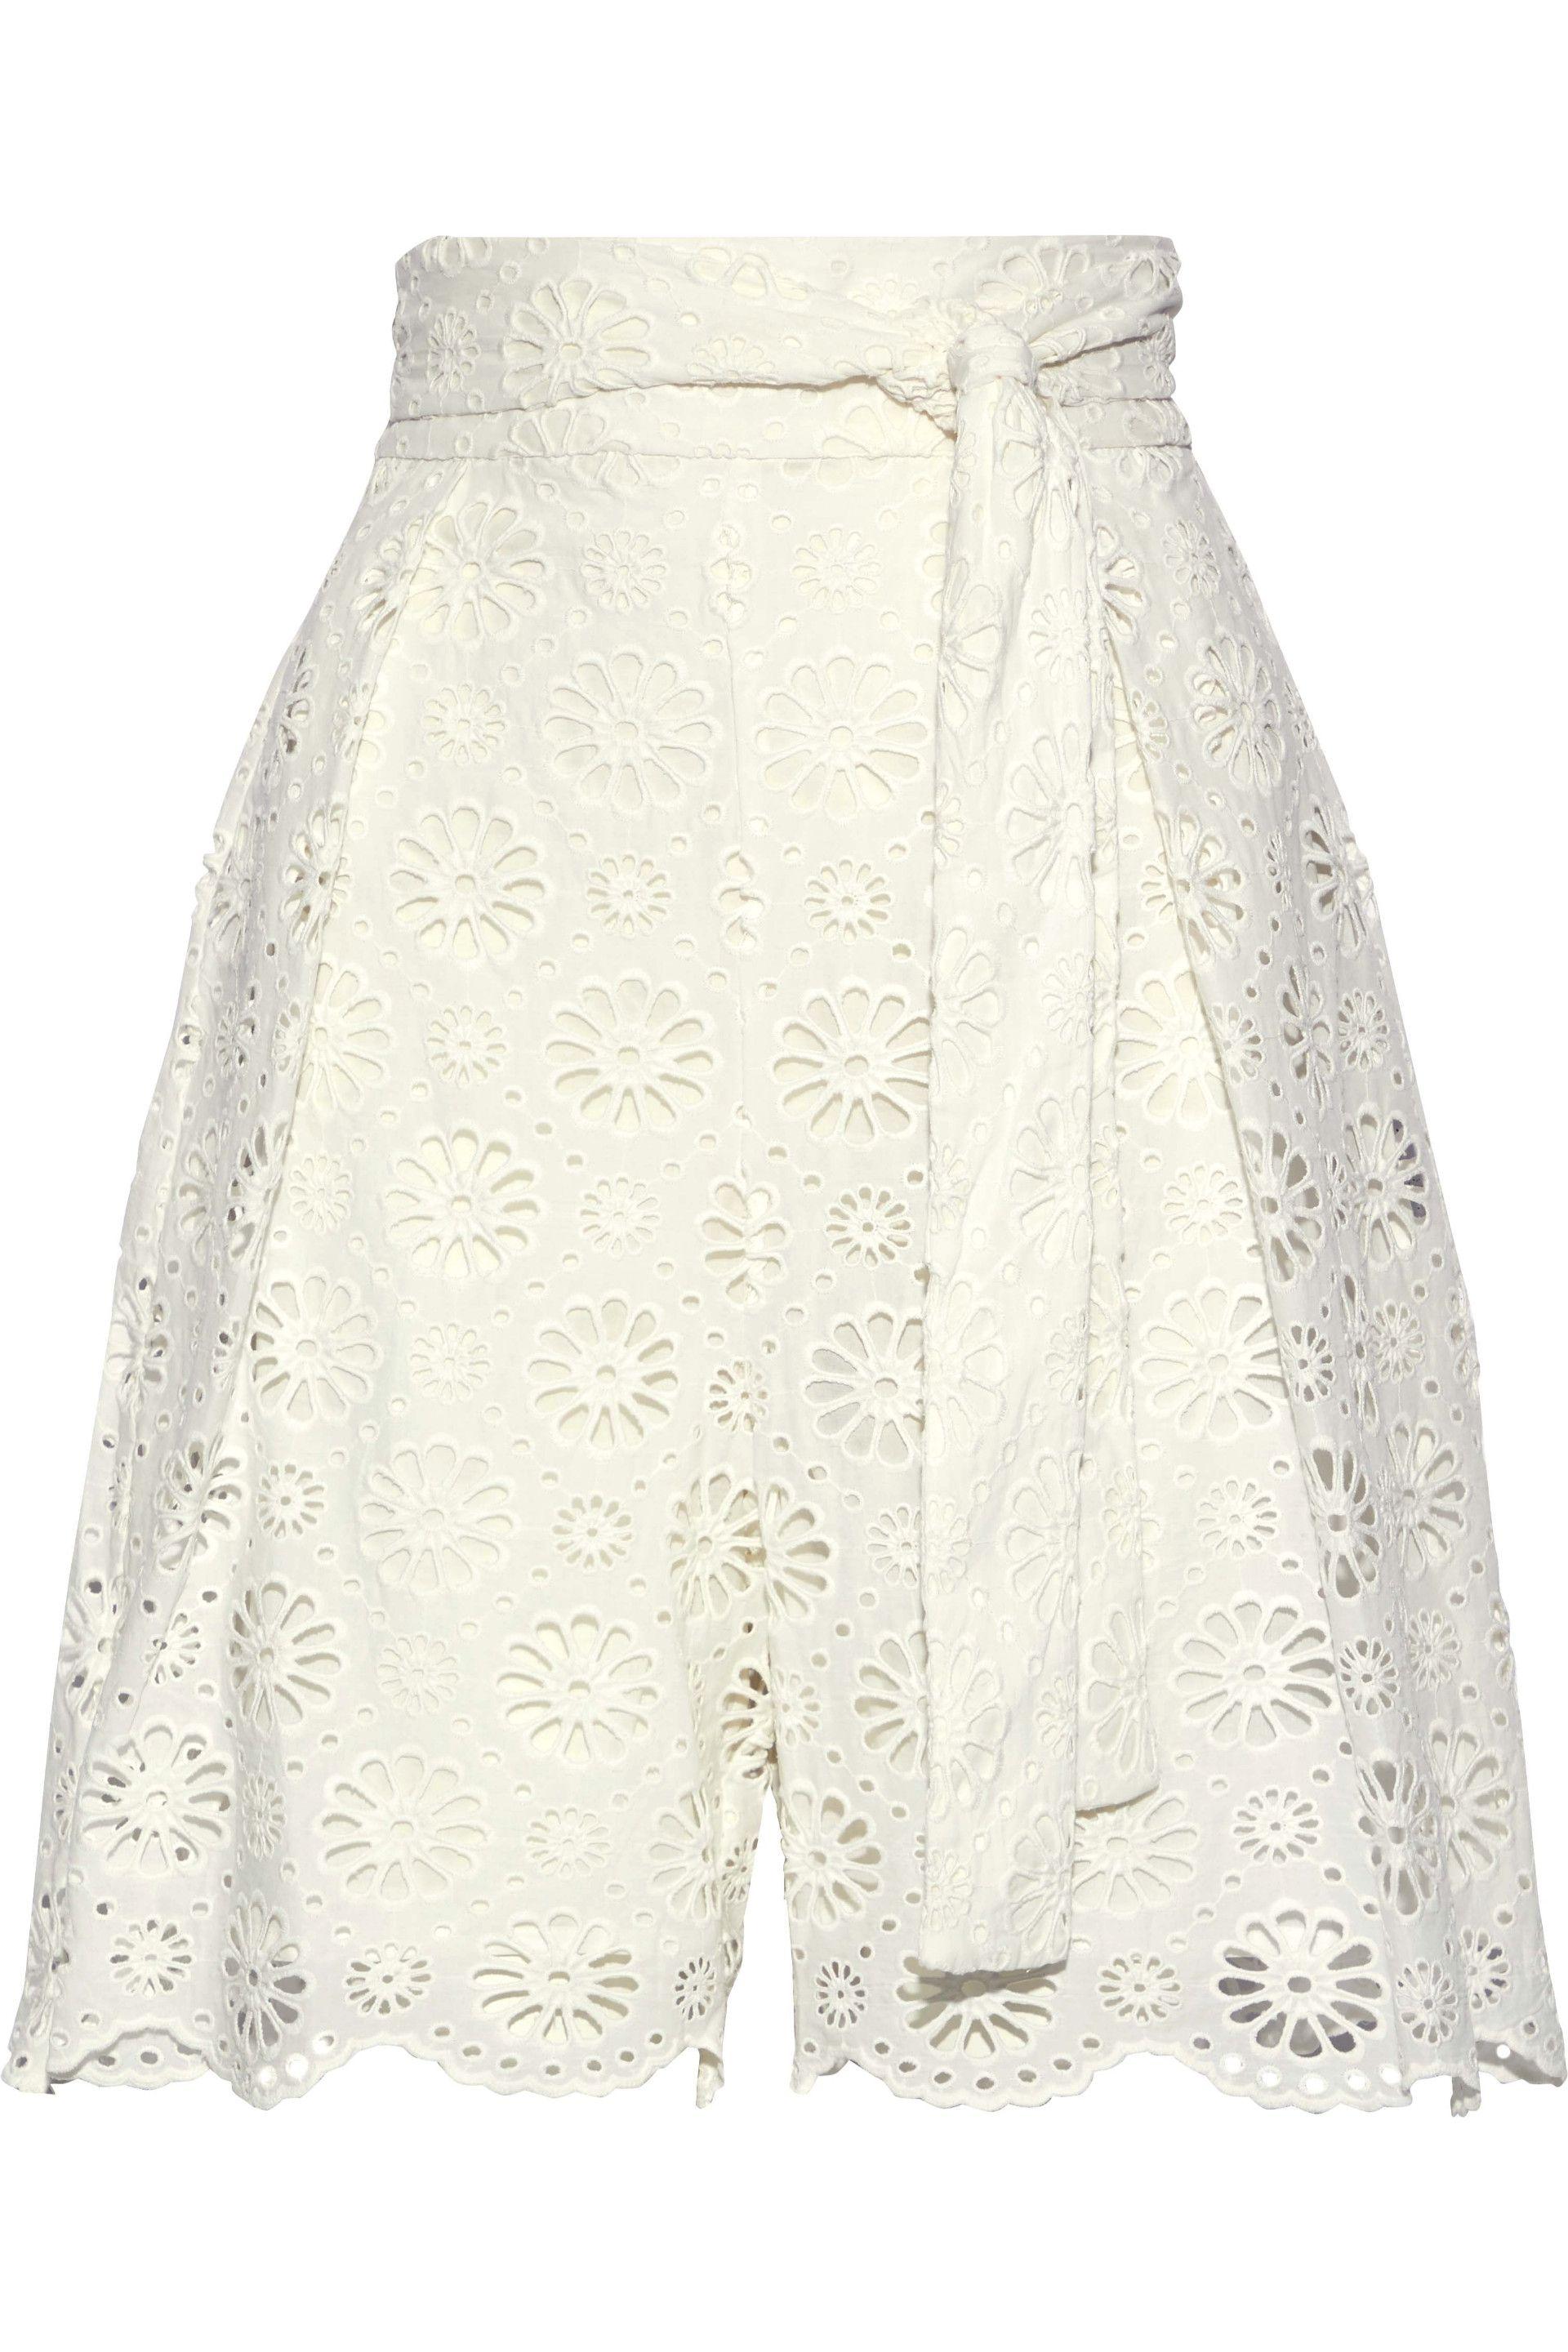 Zimmermann Belted Broderie Anglaise Cotton Shorts Ivory in White - Lyst